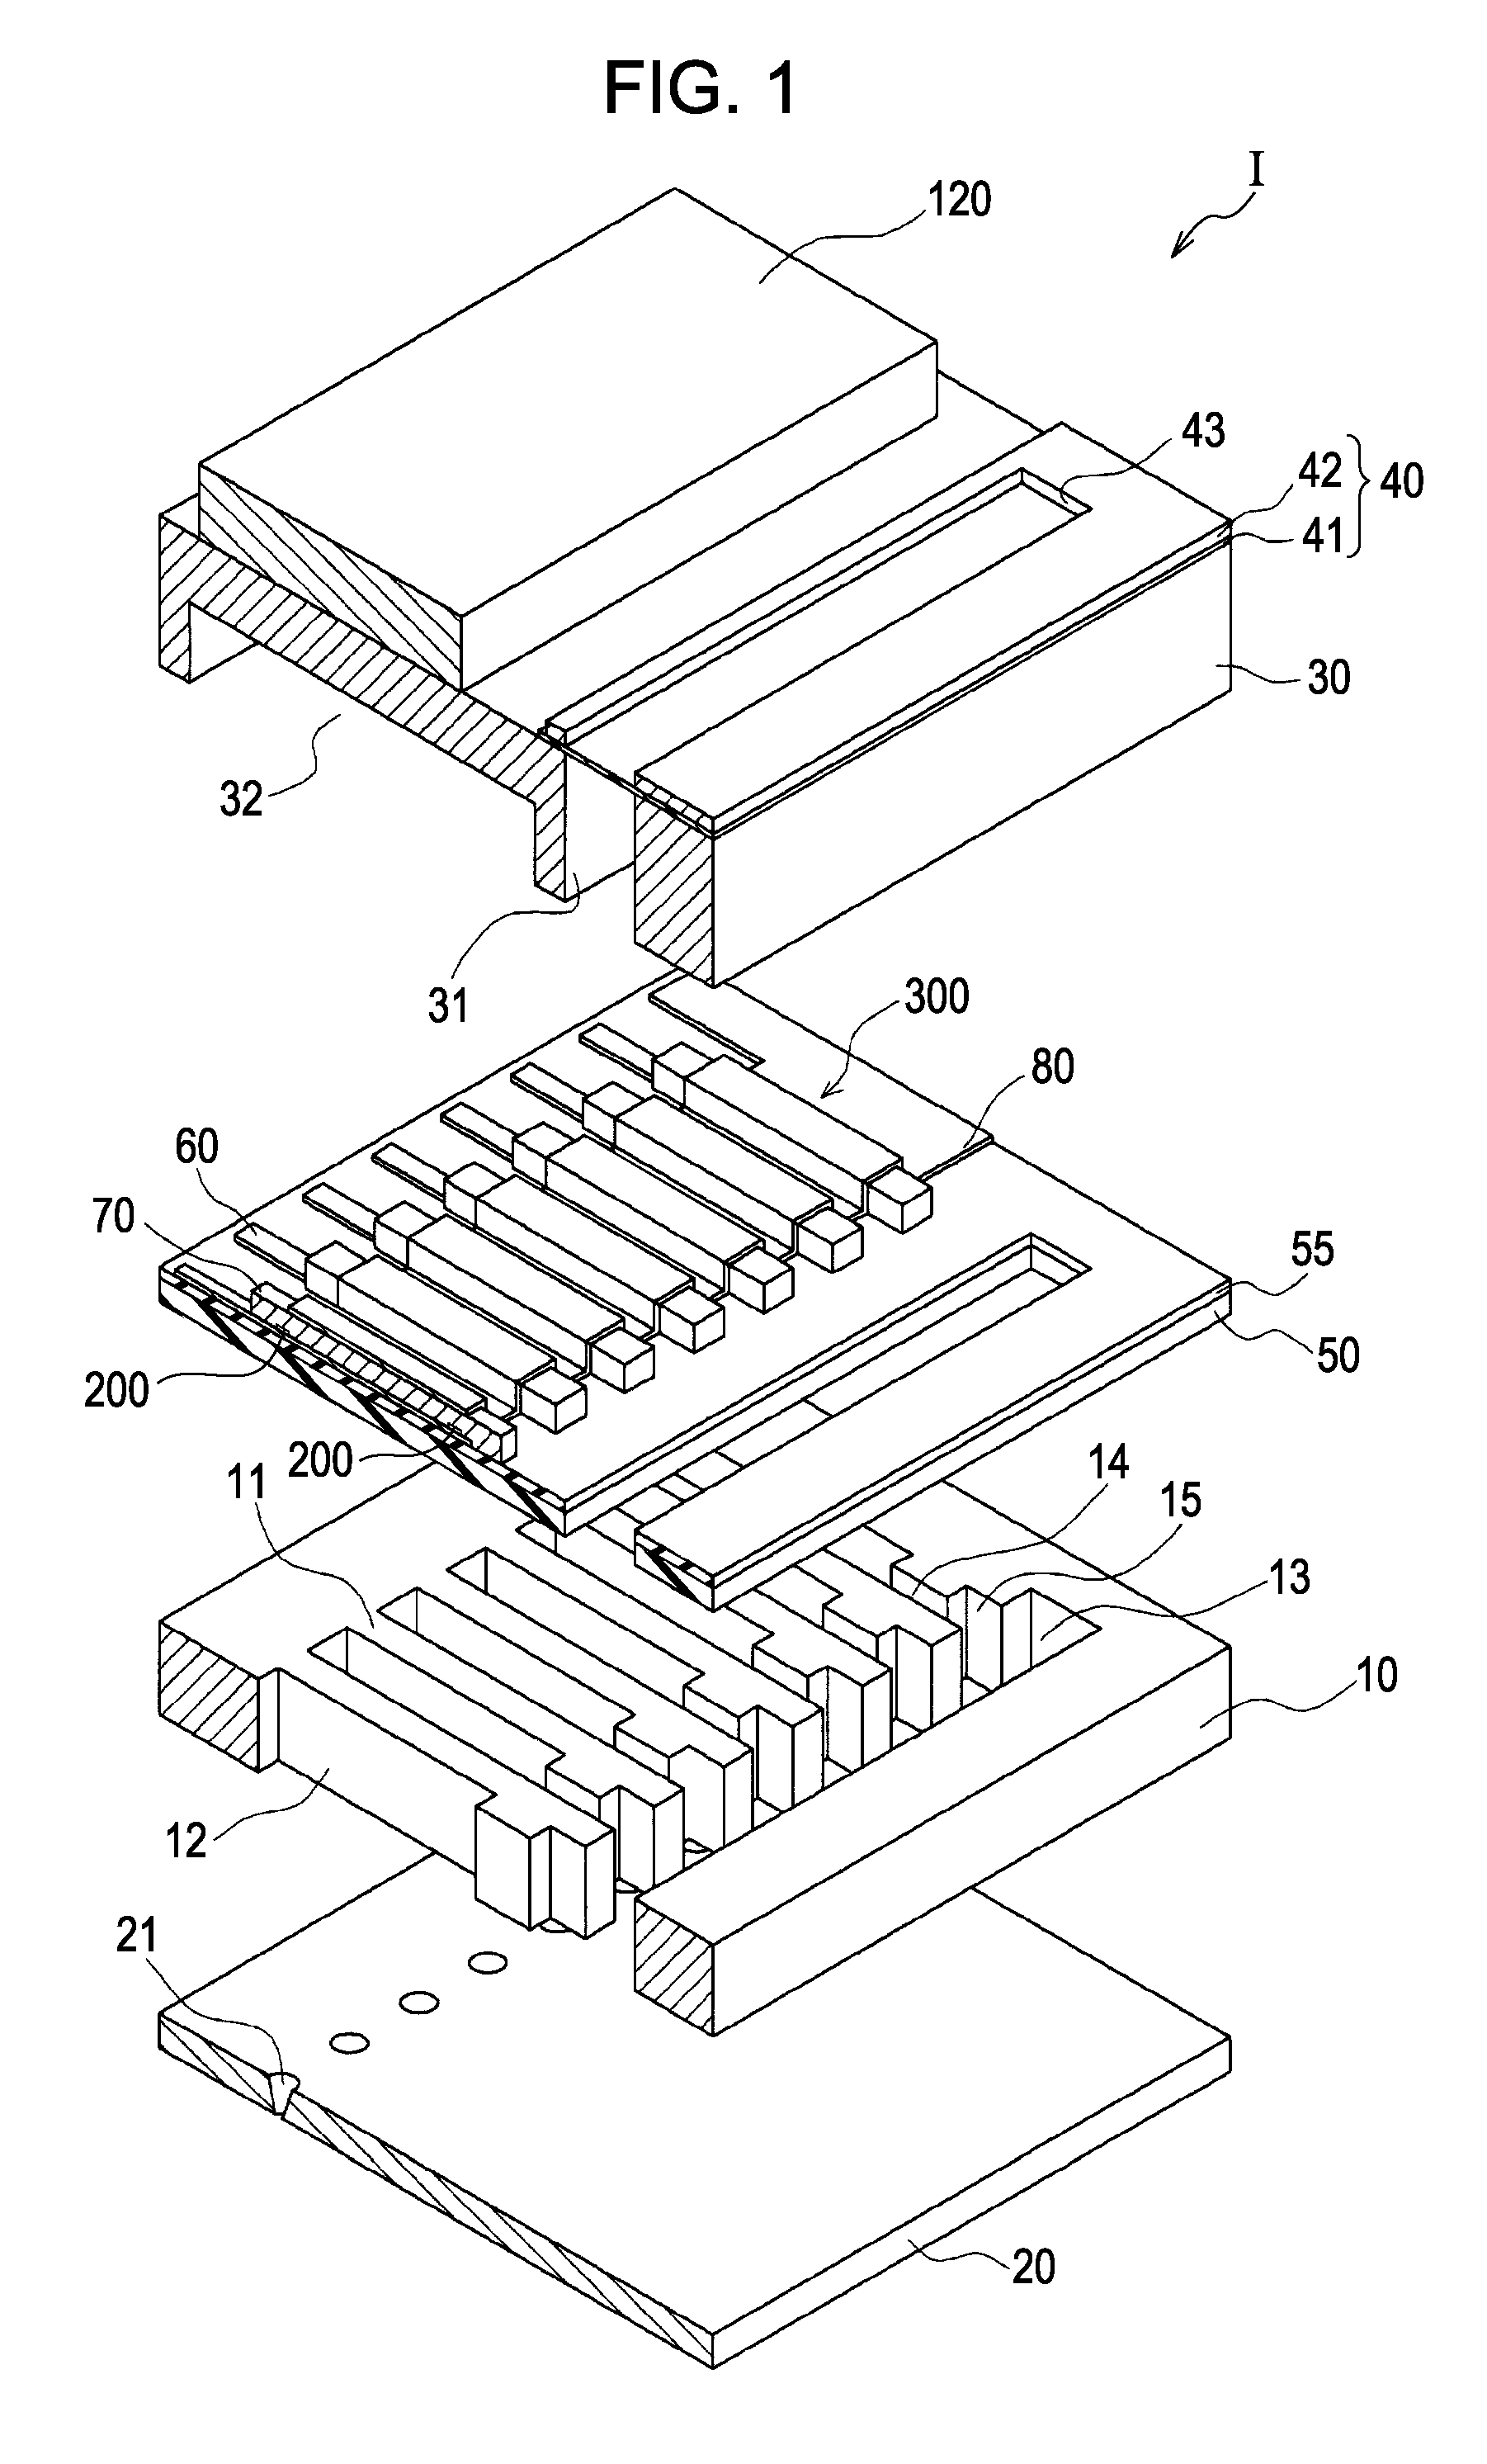 Liquid ejection head and liquid ejection apparatus